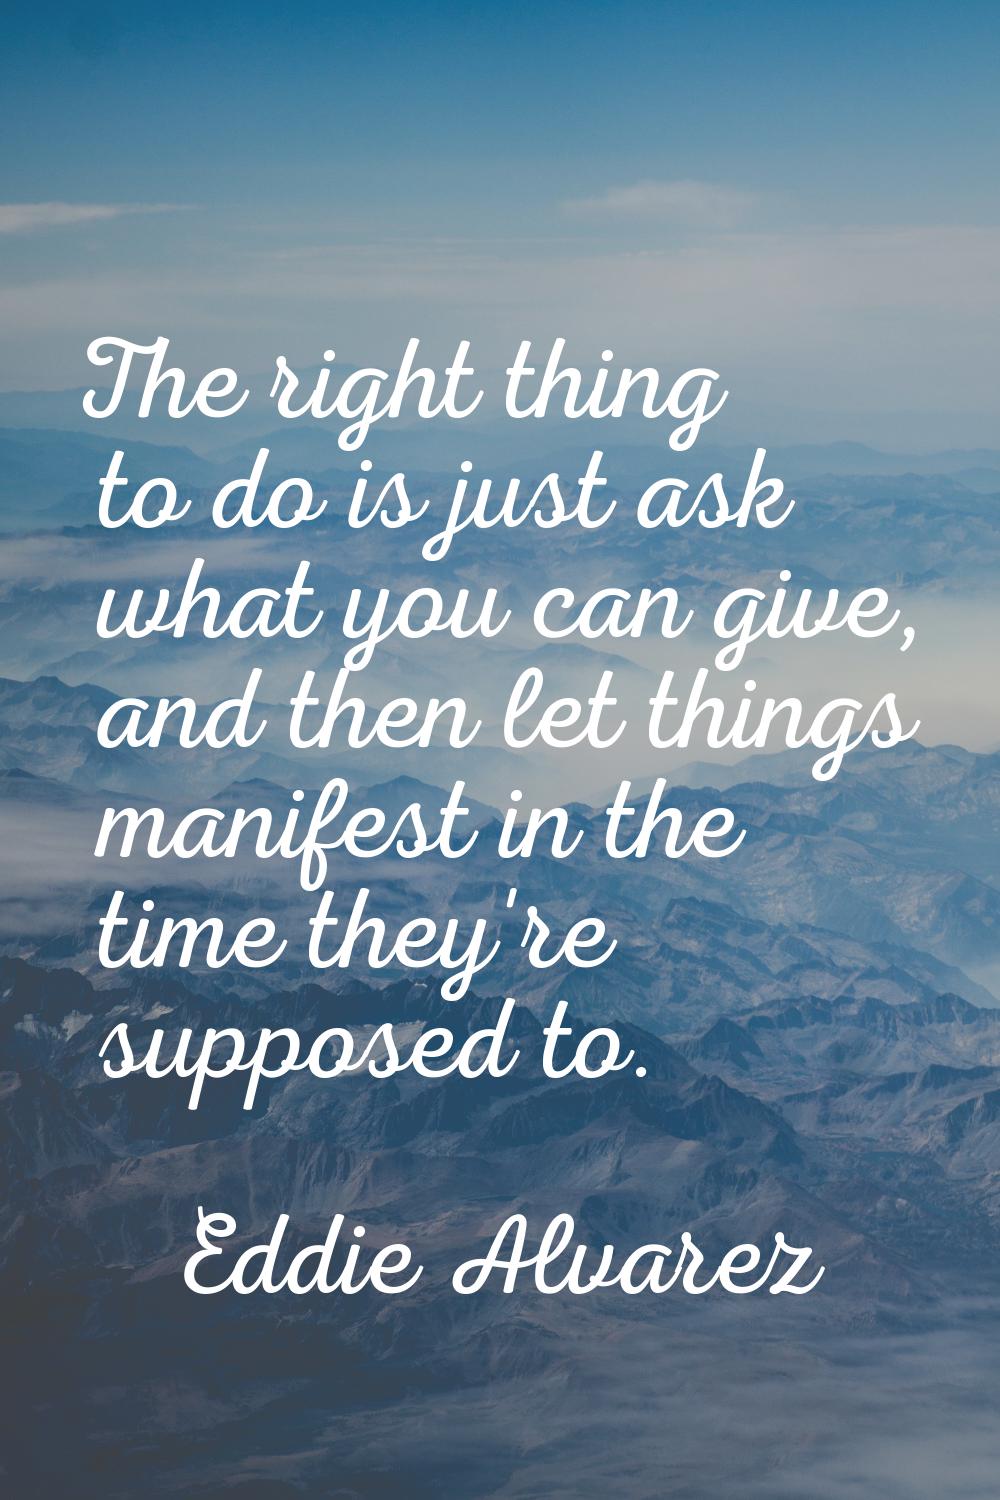 The right thing to do is just ask what you can give, and then let things manifest in the time they'